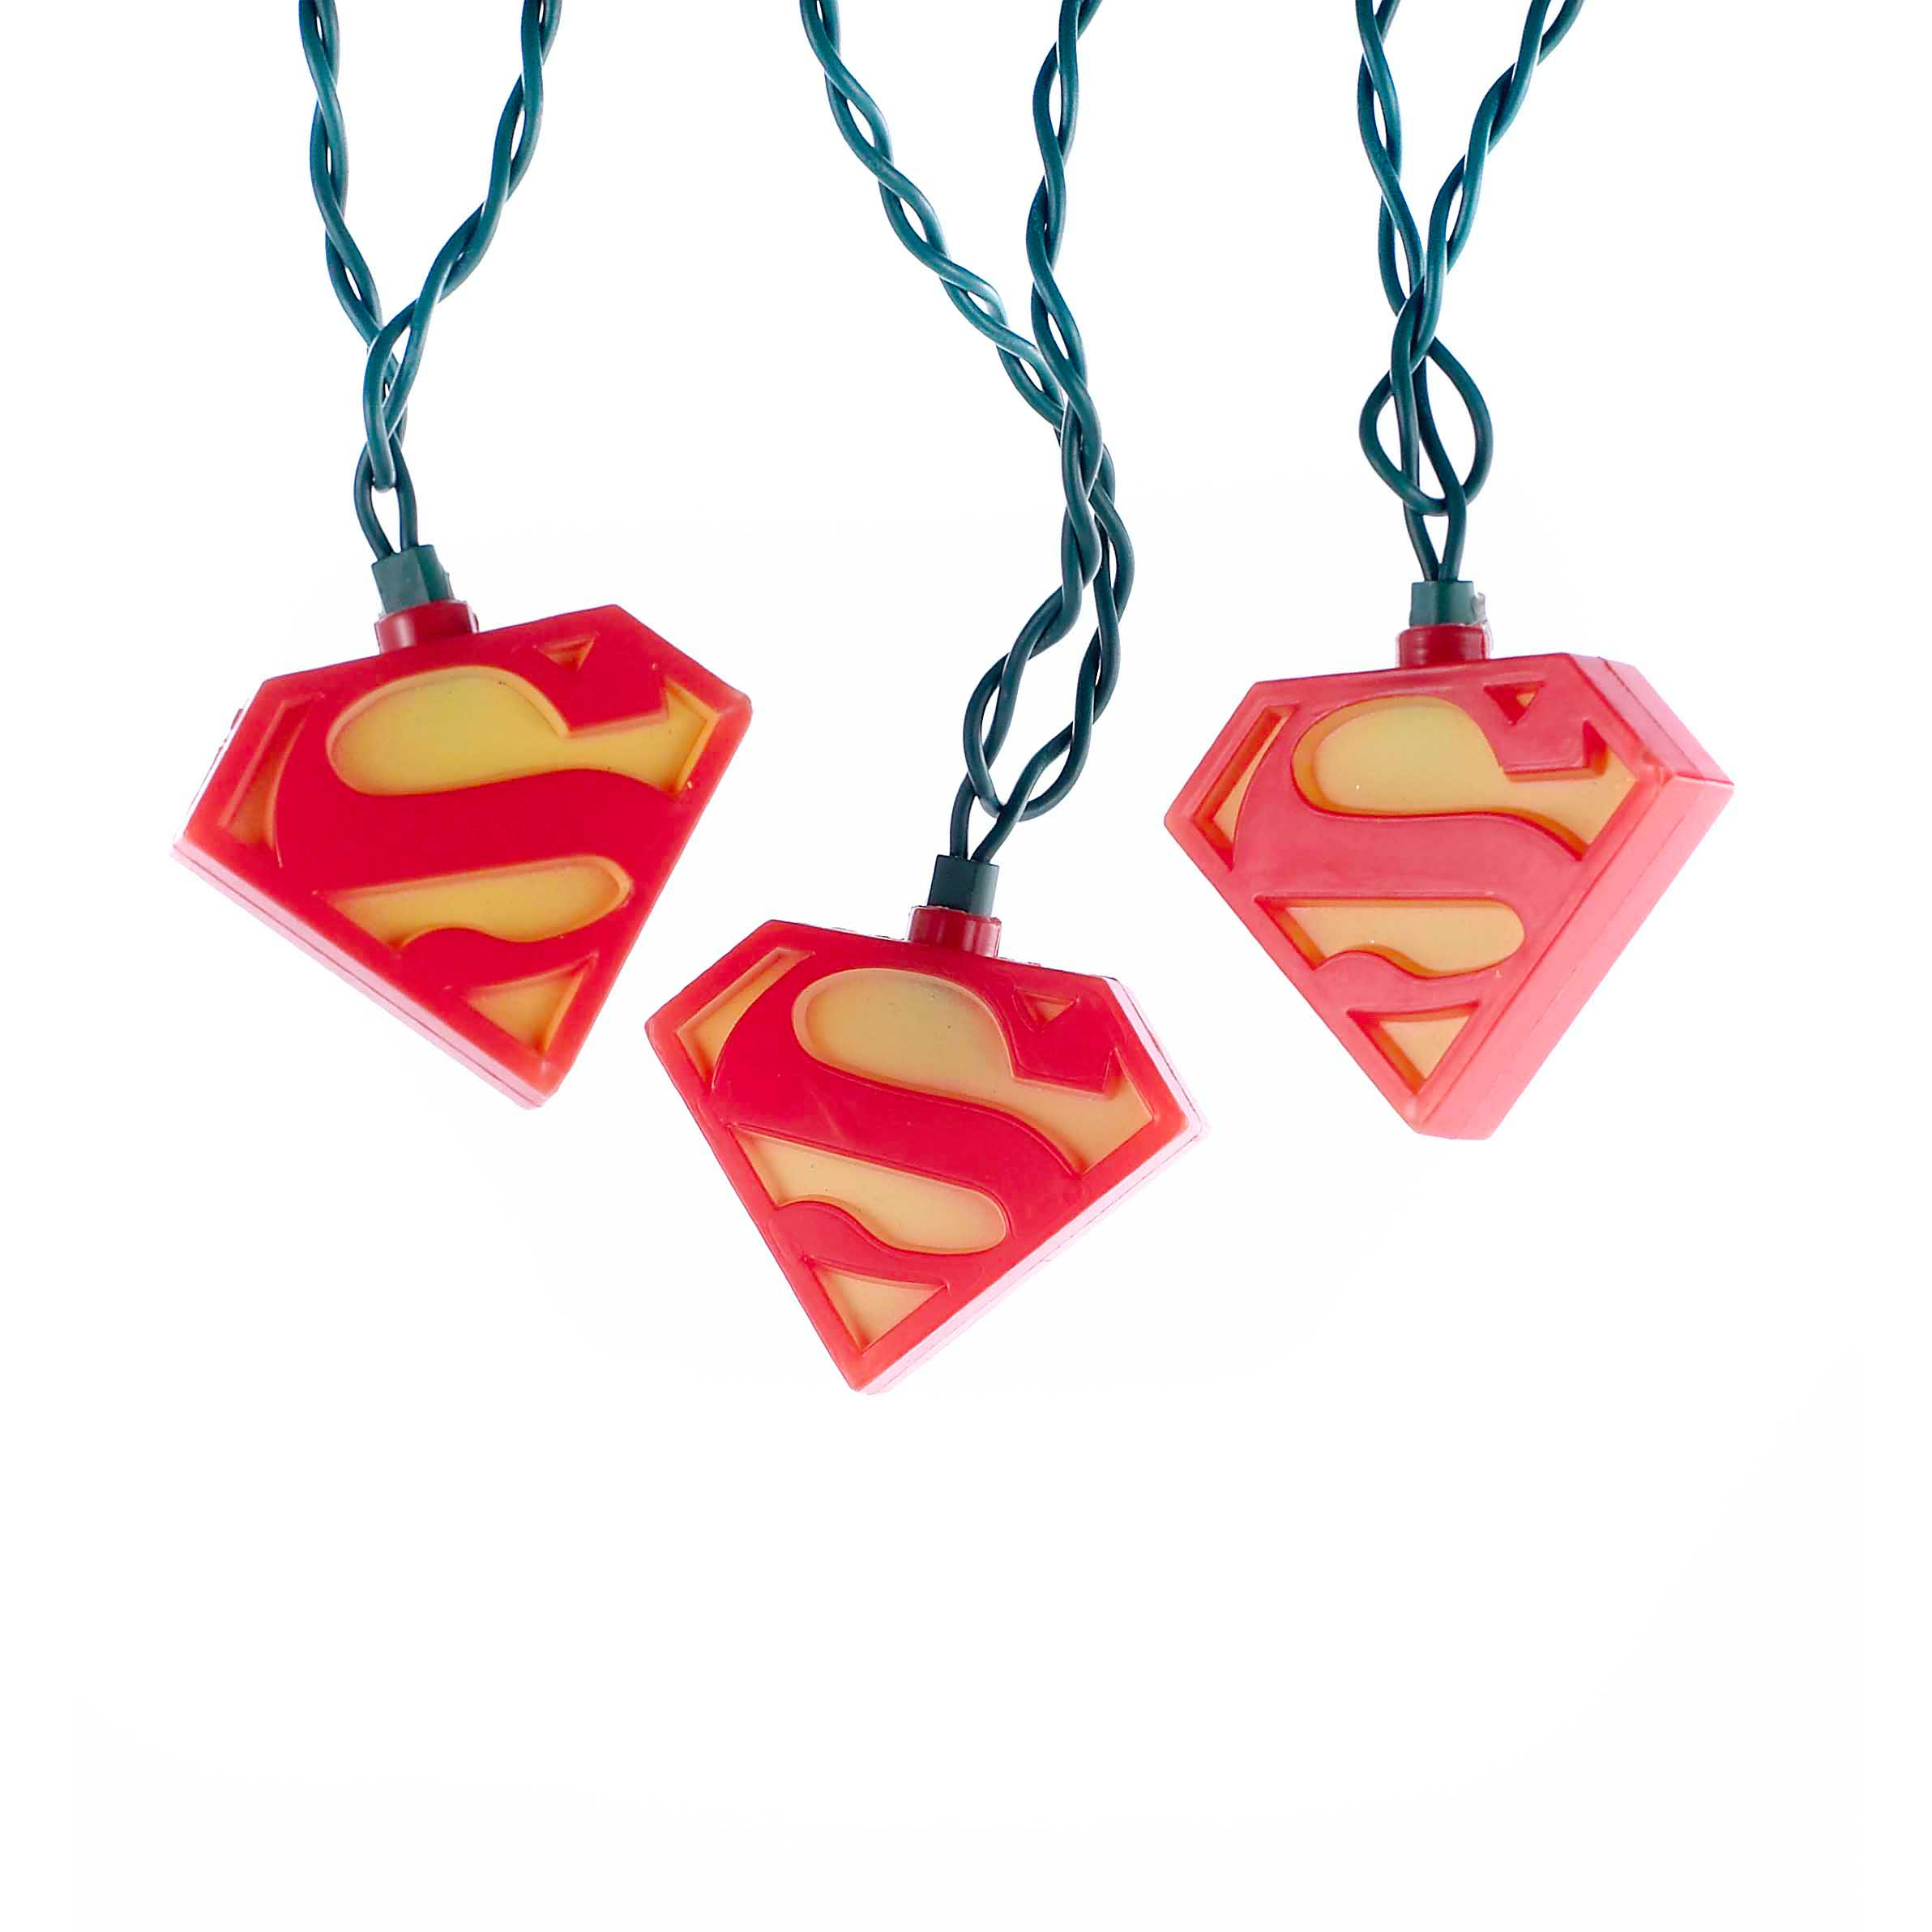 KurtAdlerSupermanlights Celebrate The Holiday Season With Gifts From WB